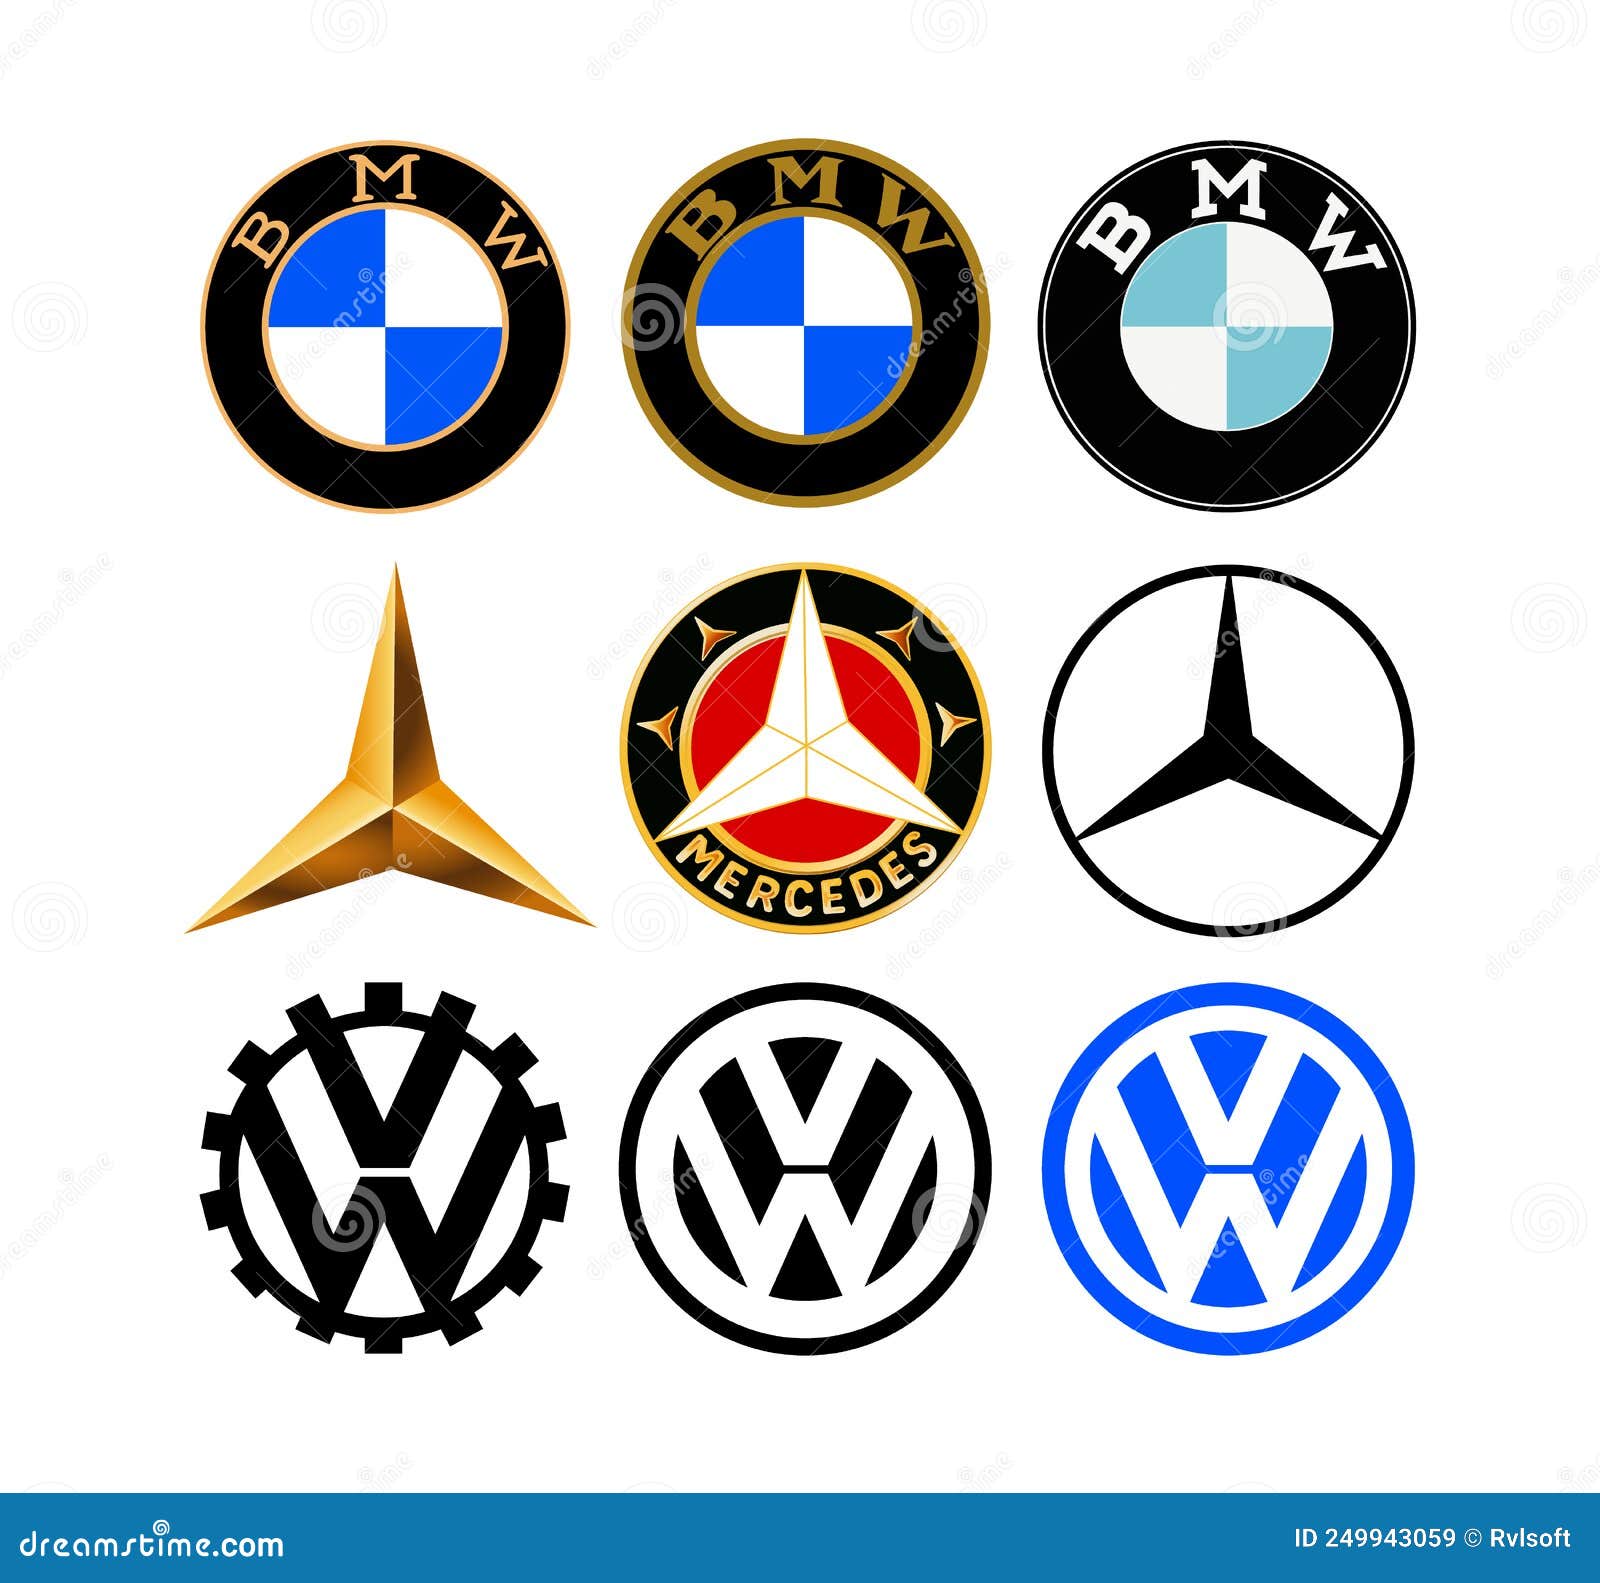 German cars logo company set: BMW, Audi, Mercedes, Volkswagen, Opel.  Isolated Germany car emblem on white background. Editorial illustration.  Stock Vector